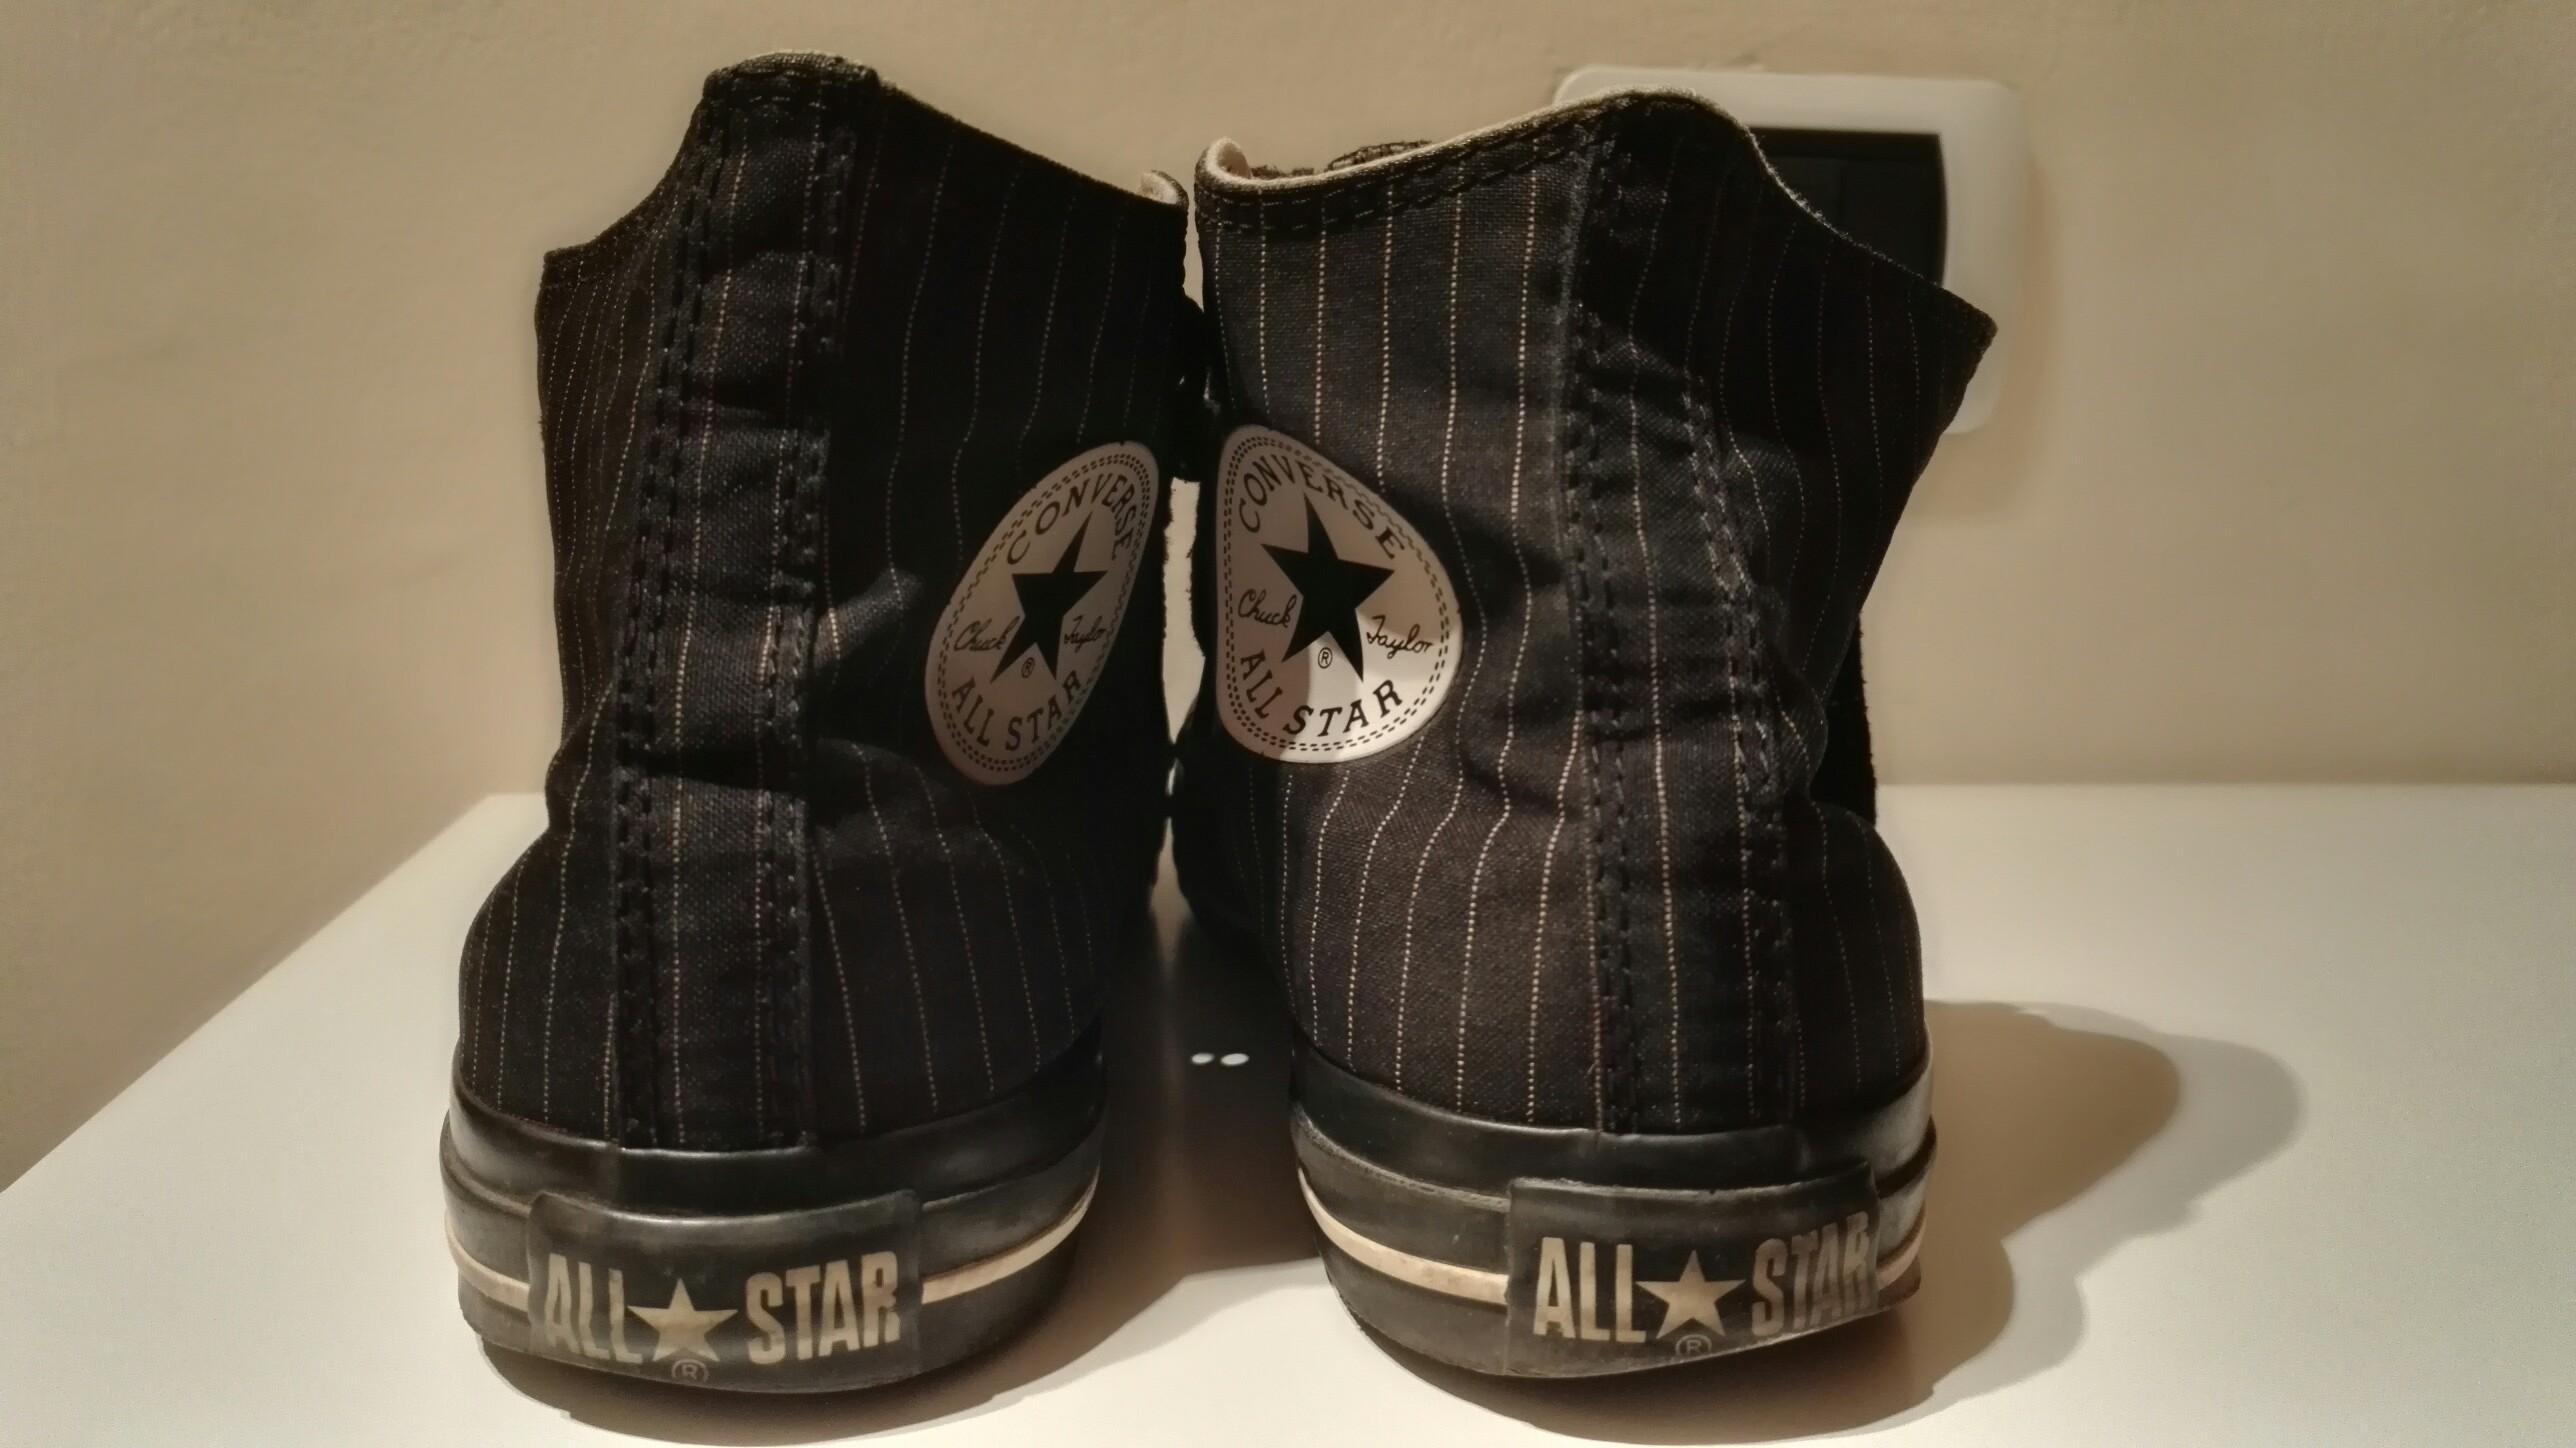 Converse All Star gessate nr 41 in 50127 Firenze for €20.00 for sale |  Shpock